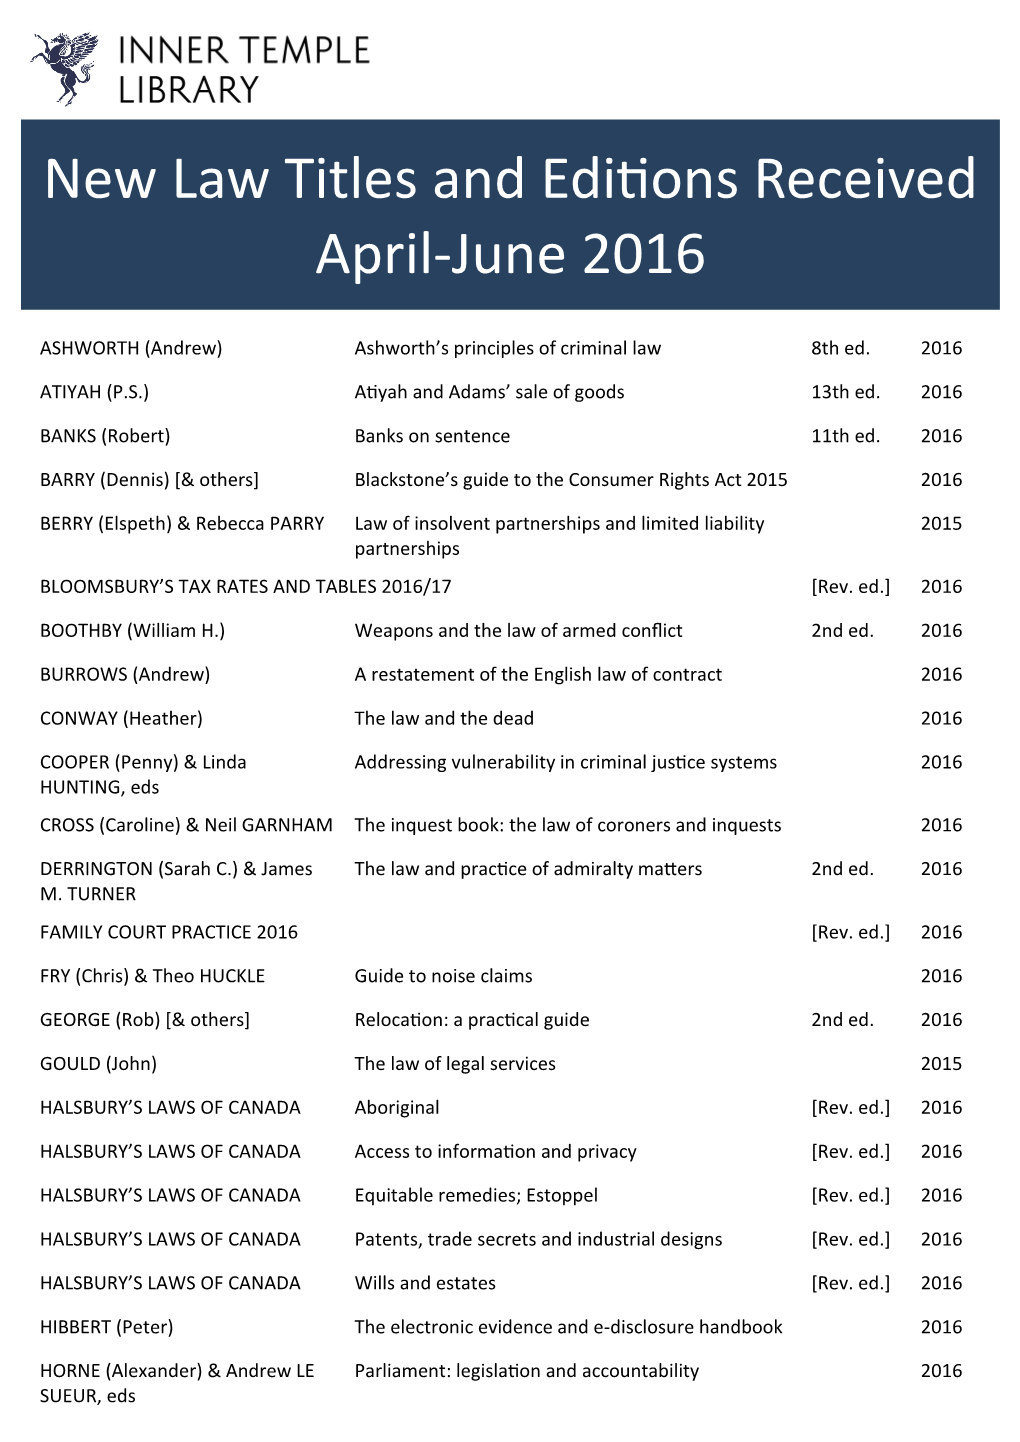 New Law Titles and Editions Received April-June 2016